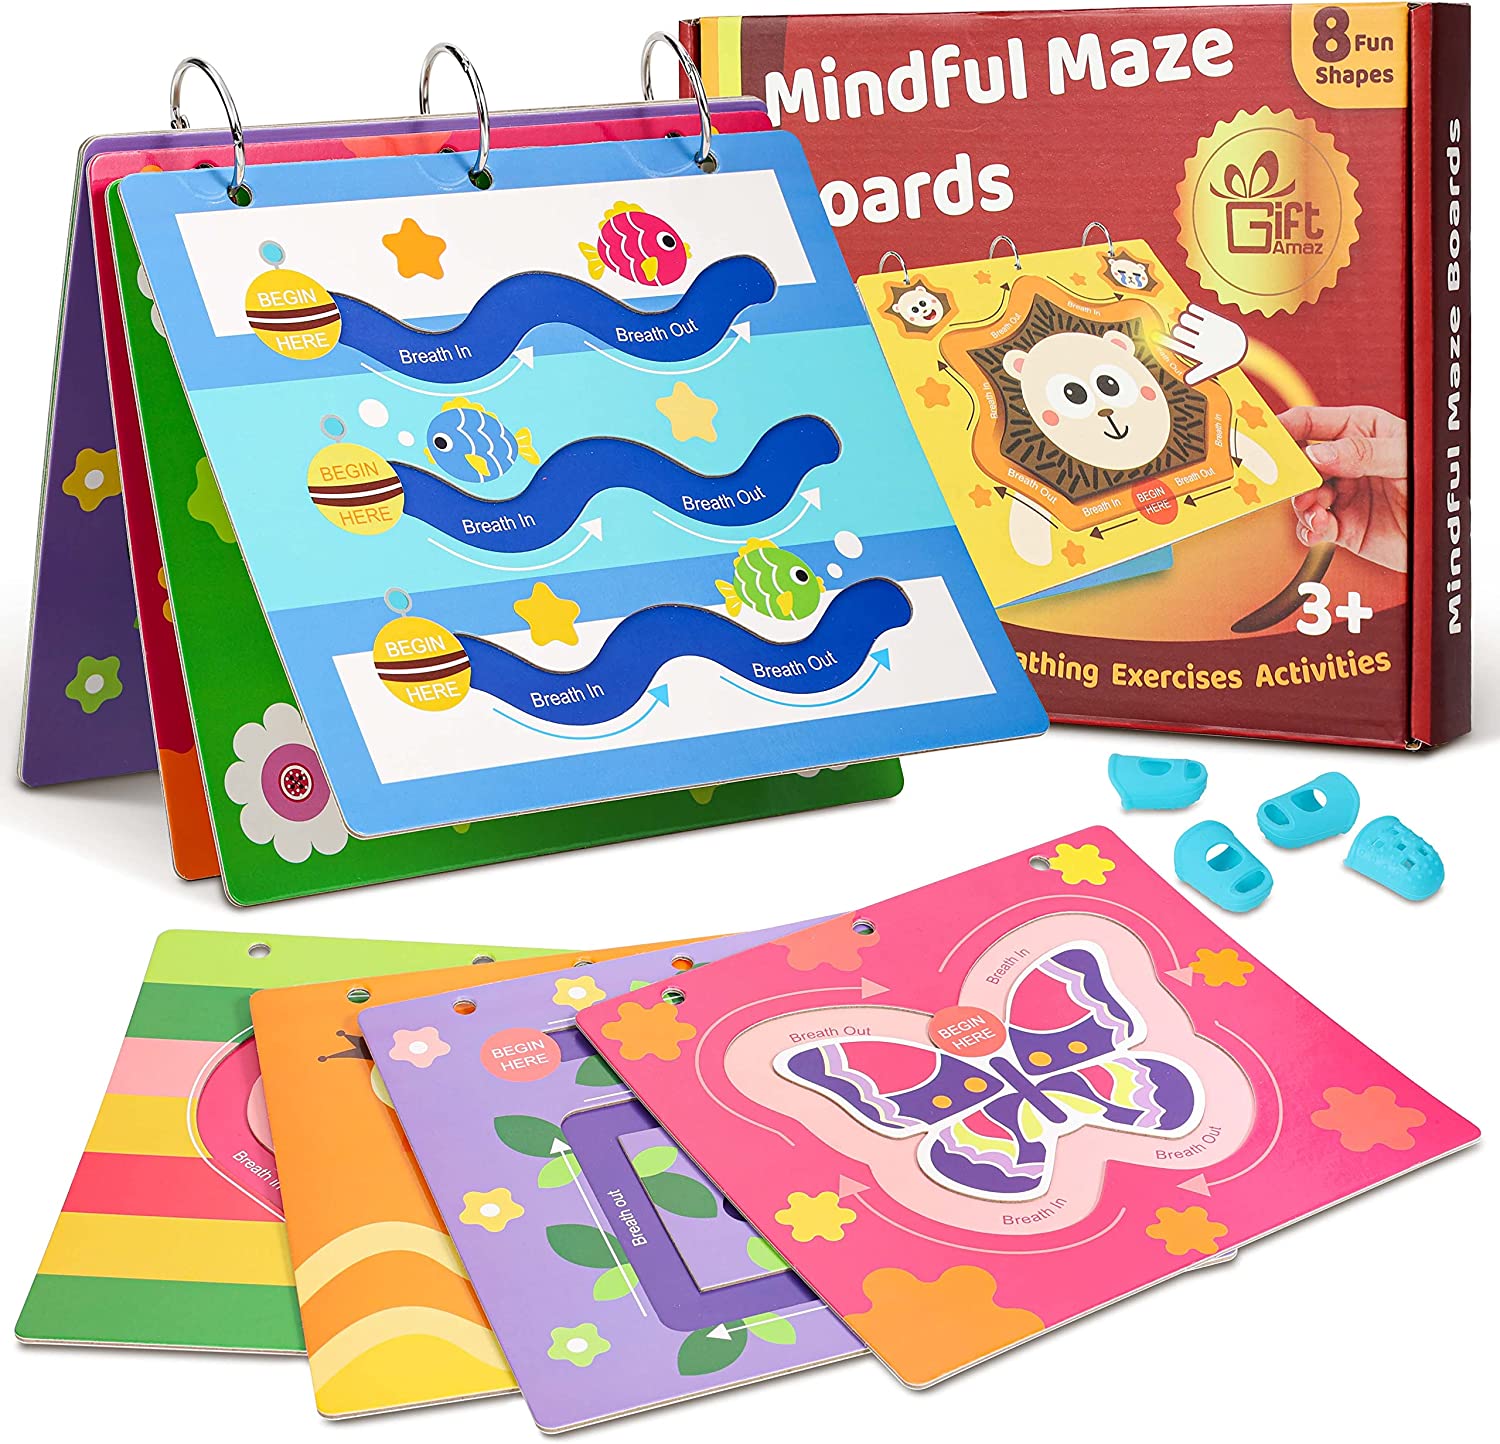 Mindful Maze Boards, Calming Toys for Kids, Finger Path Breathing Boards